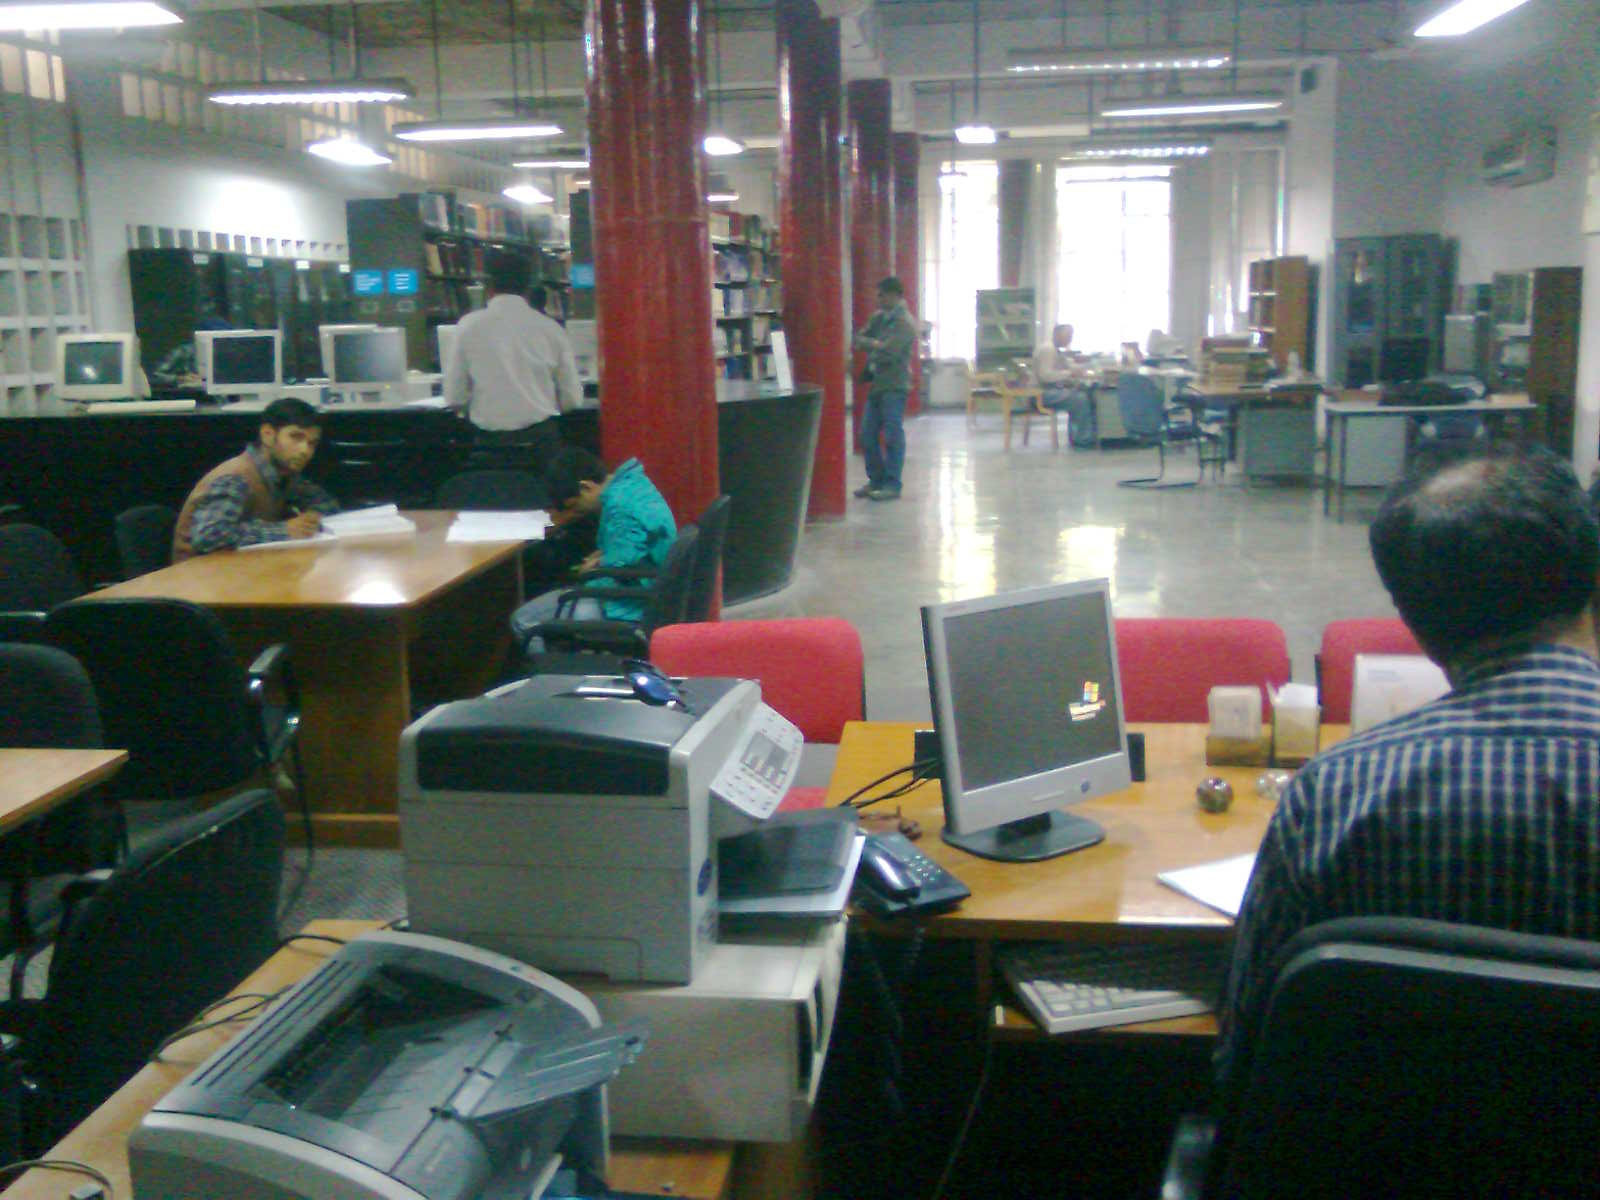 Reference Section, Central State Library, Chandigarh